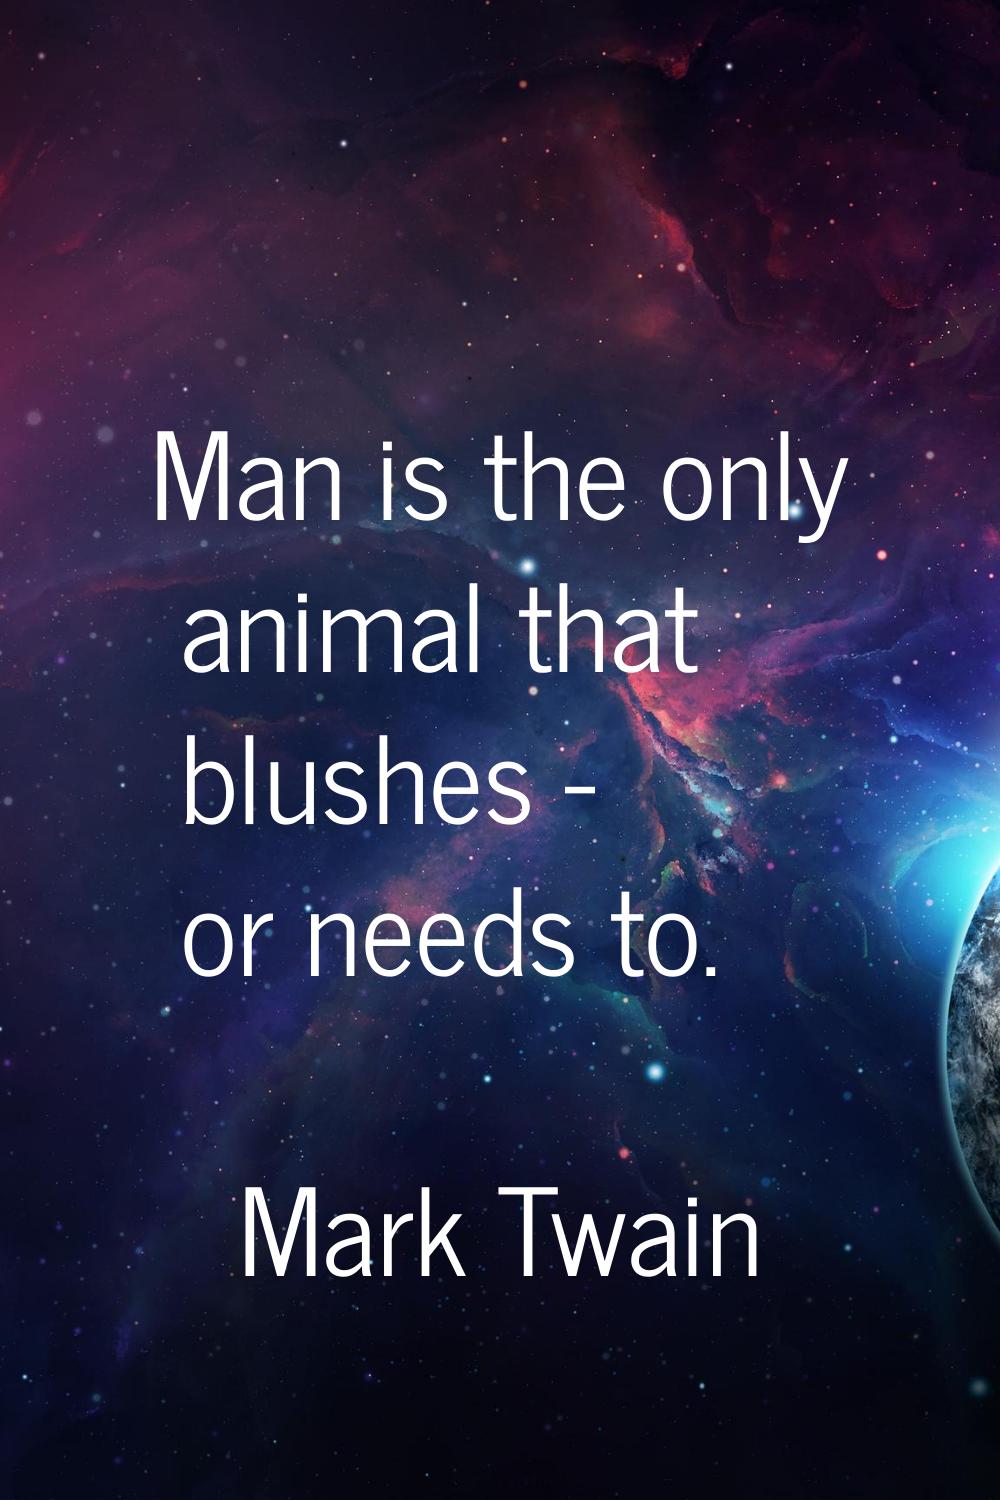 Man is the only animal that blushes - or needs to.